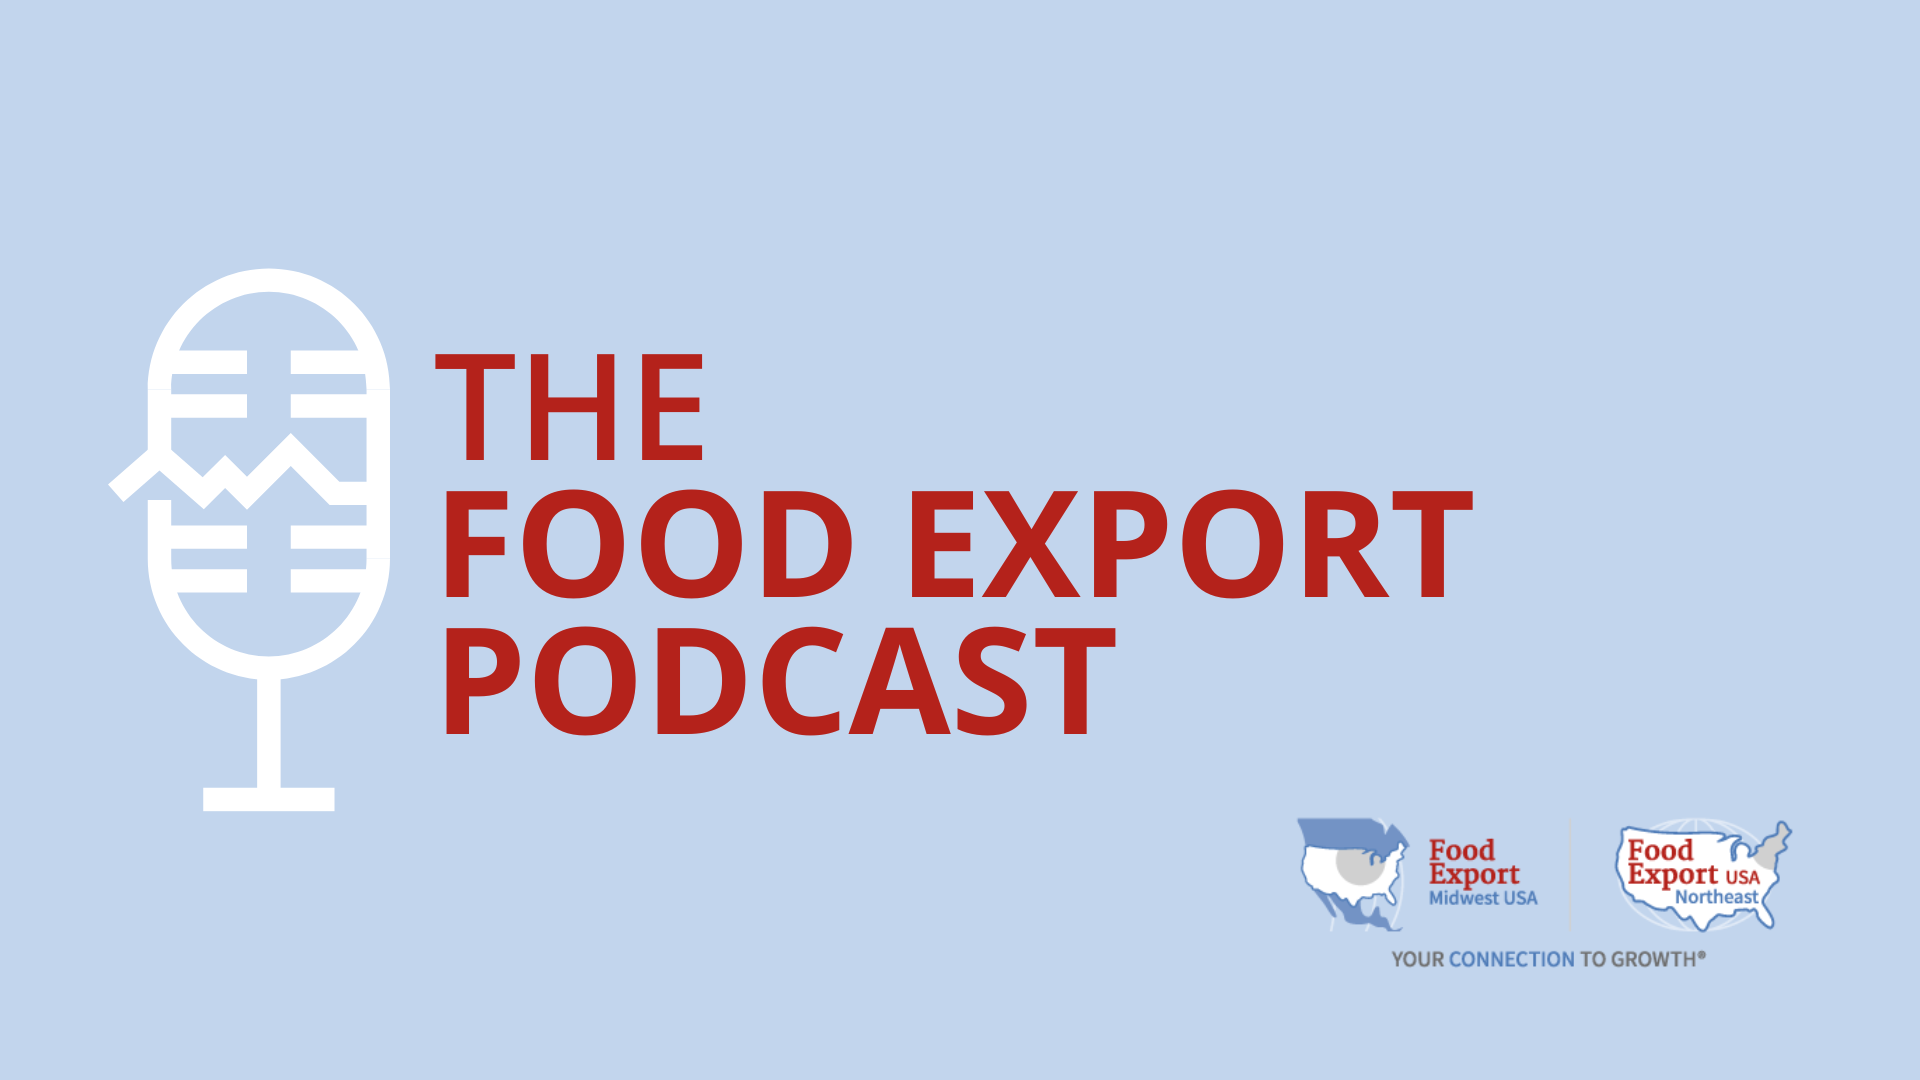 The Food Export Podcast (700 x 392 px)